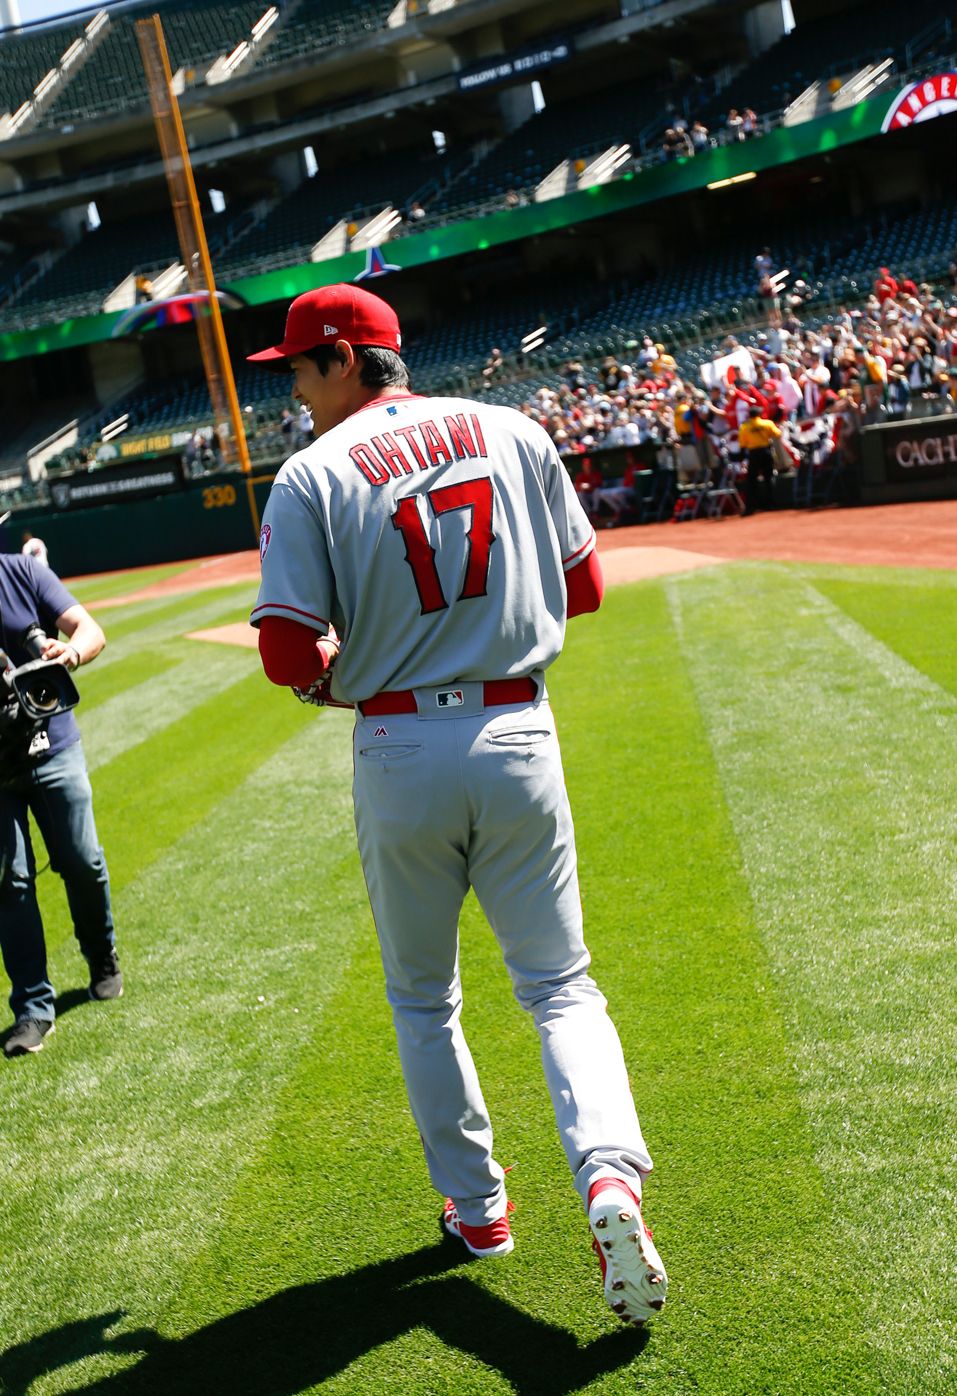 oakland, ca april 1 shohei ohtani 17 of the los angeles angels of anaheim heads to the bullpen to warm up prior to the game against the oakland athletics at the oakland alameda coliseum on april 1, 2018 in oakland, california the angels defeated the athletics 7 4 photo by michael zagarisoakland athleticsgetty images local caption shohei ohtani